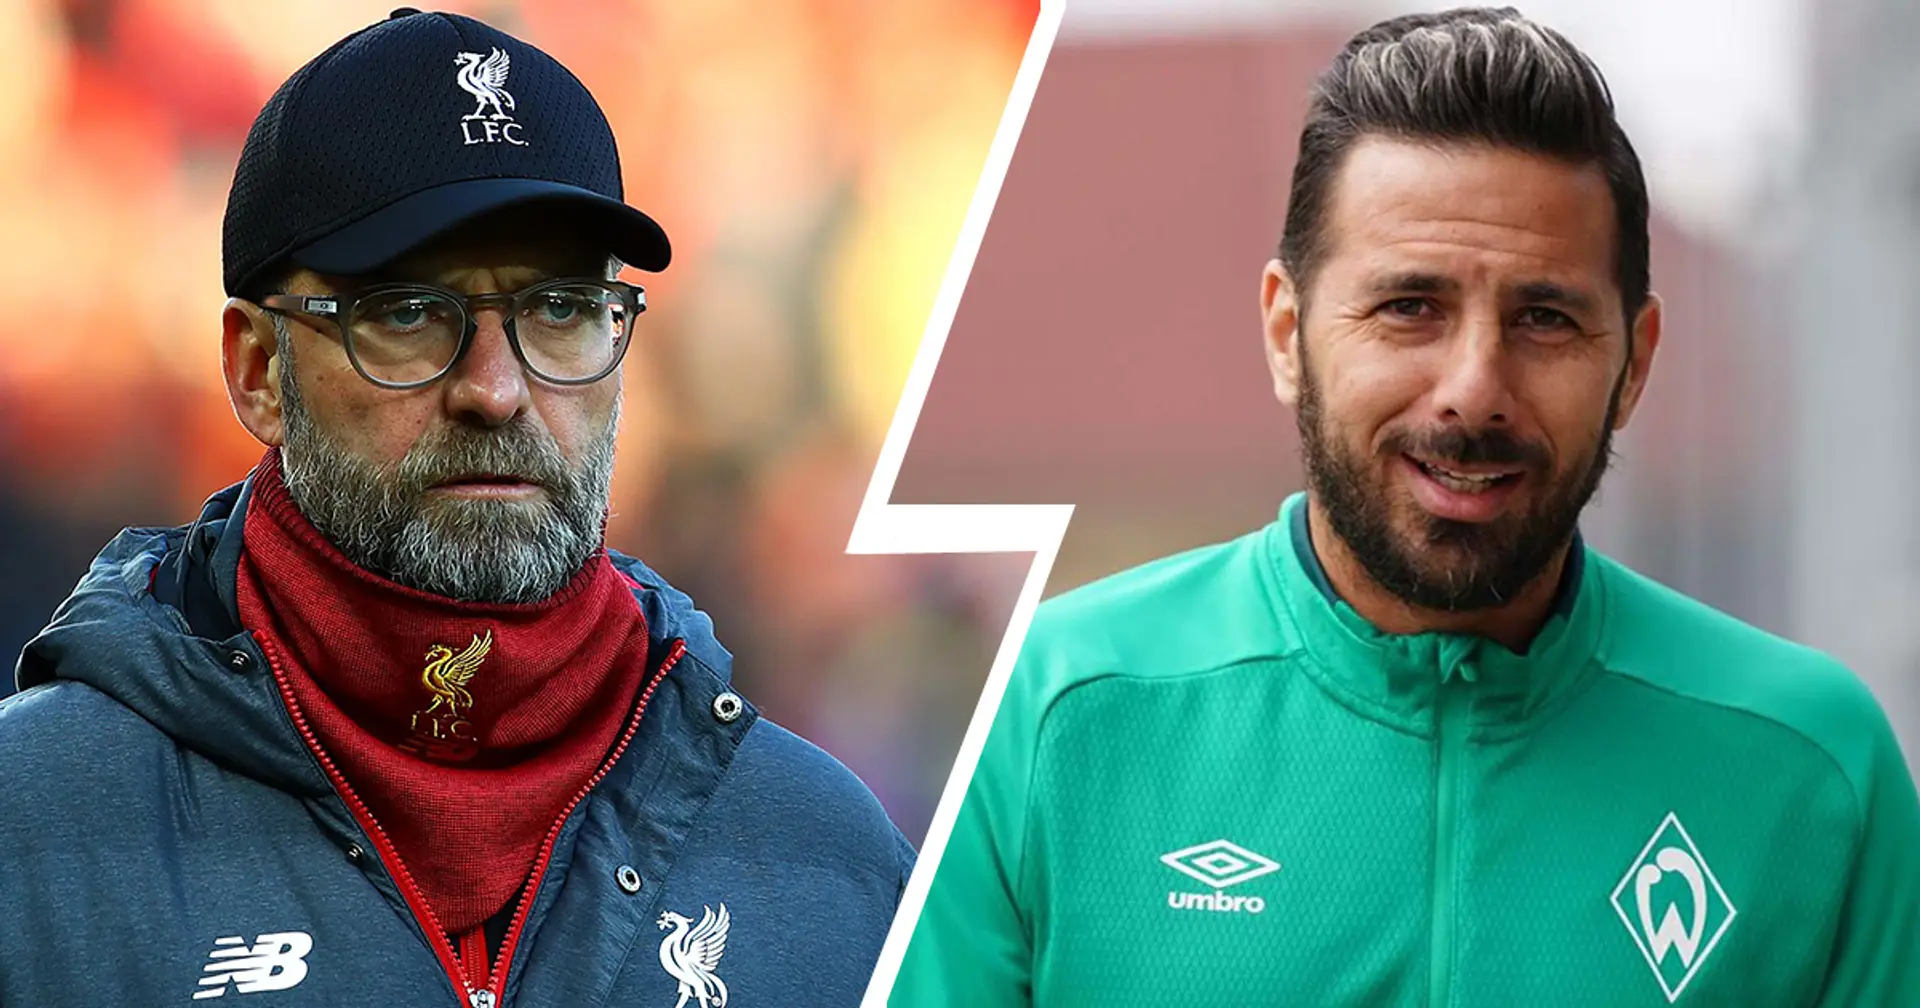 Ex-Bayern striker Pizarro wishes he could work under 'totally exciting' Klopp